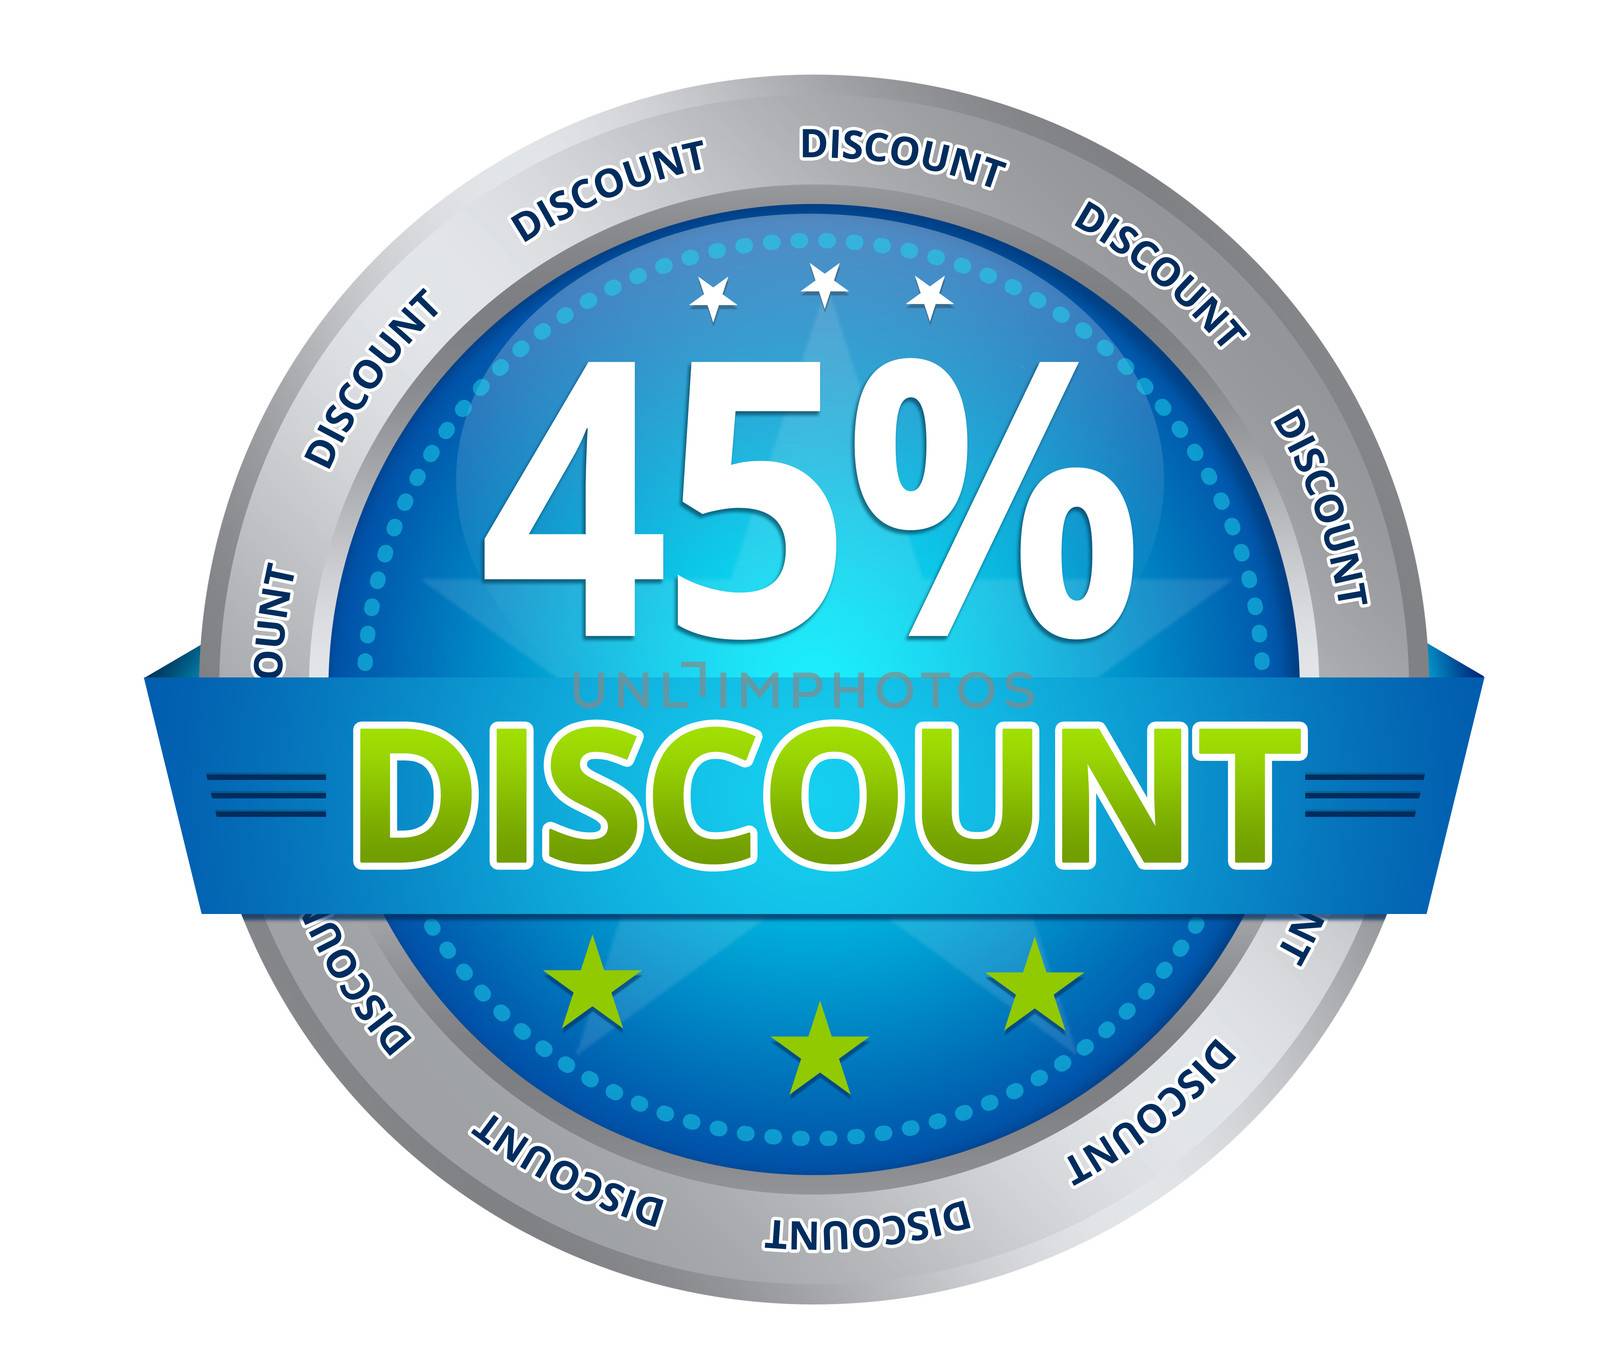 Blue 45 percent discount icon on white background